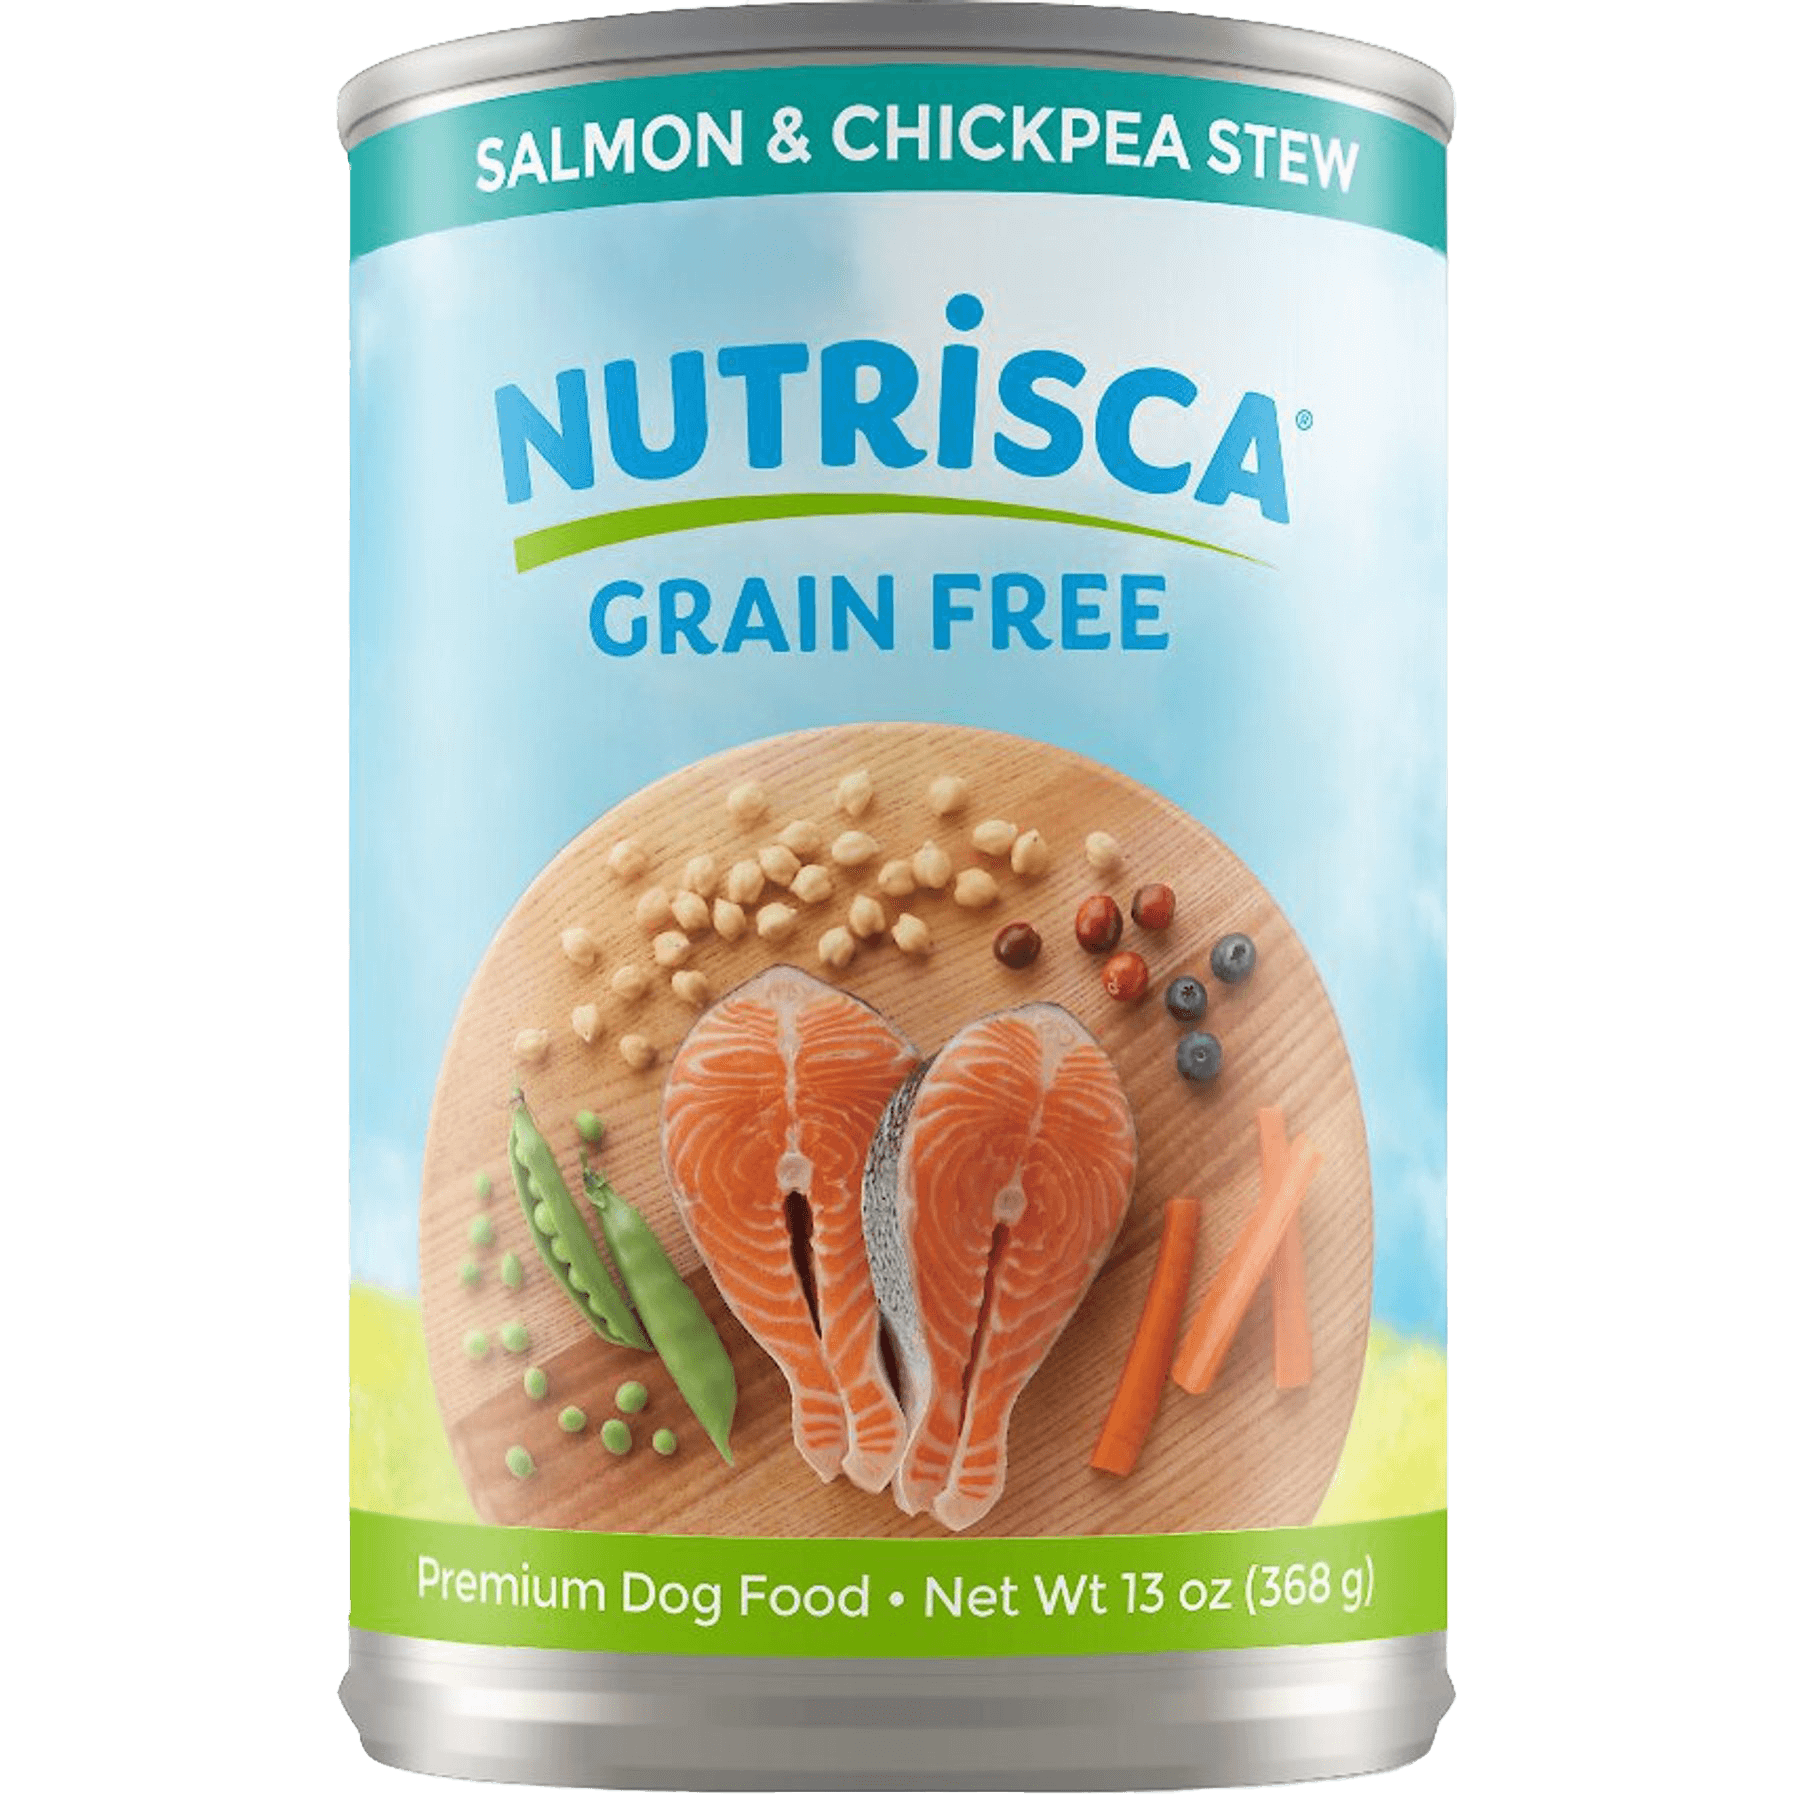 Nutrisca Grain Free Dog Food Review (Canned)